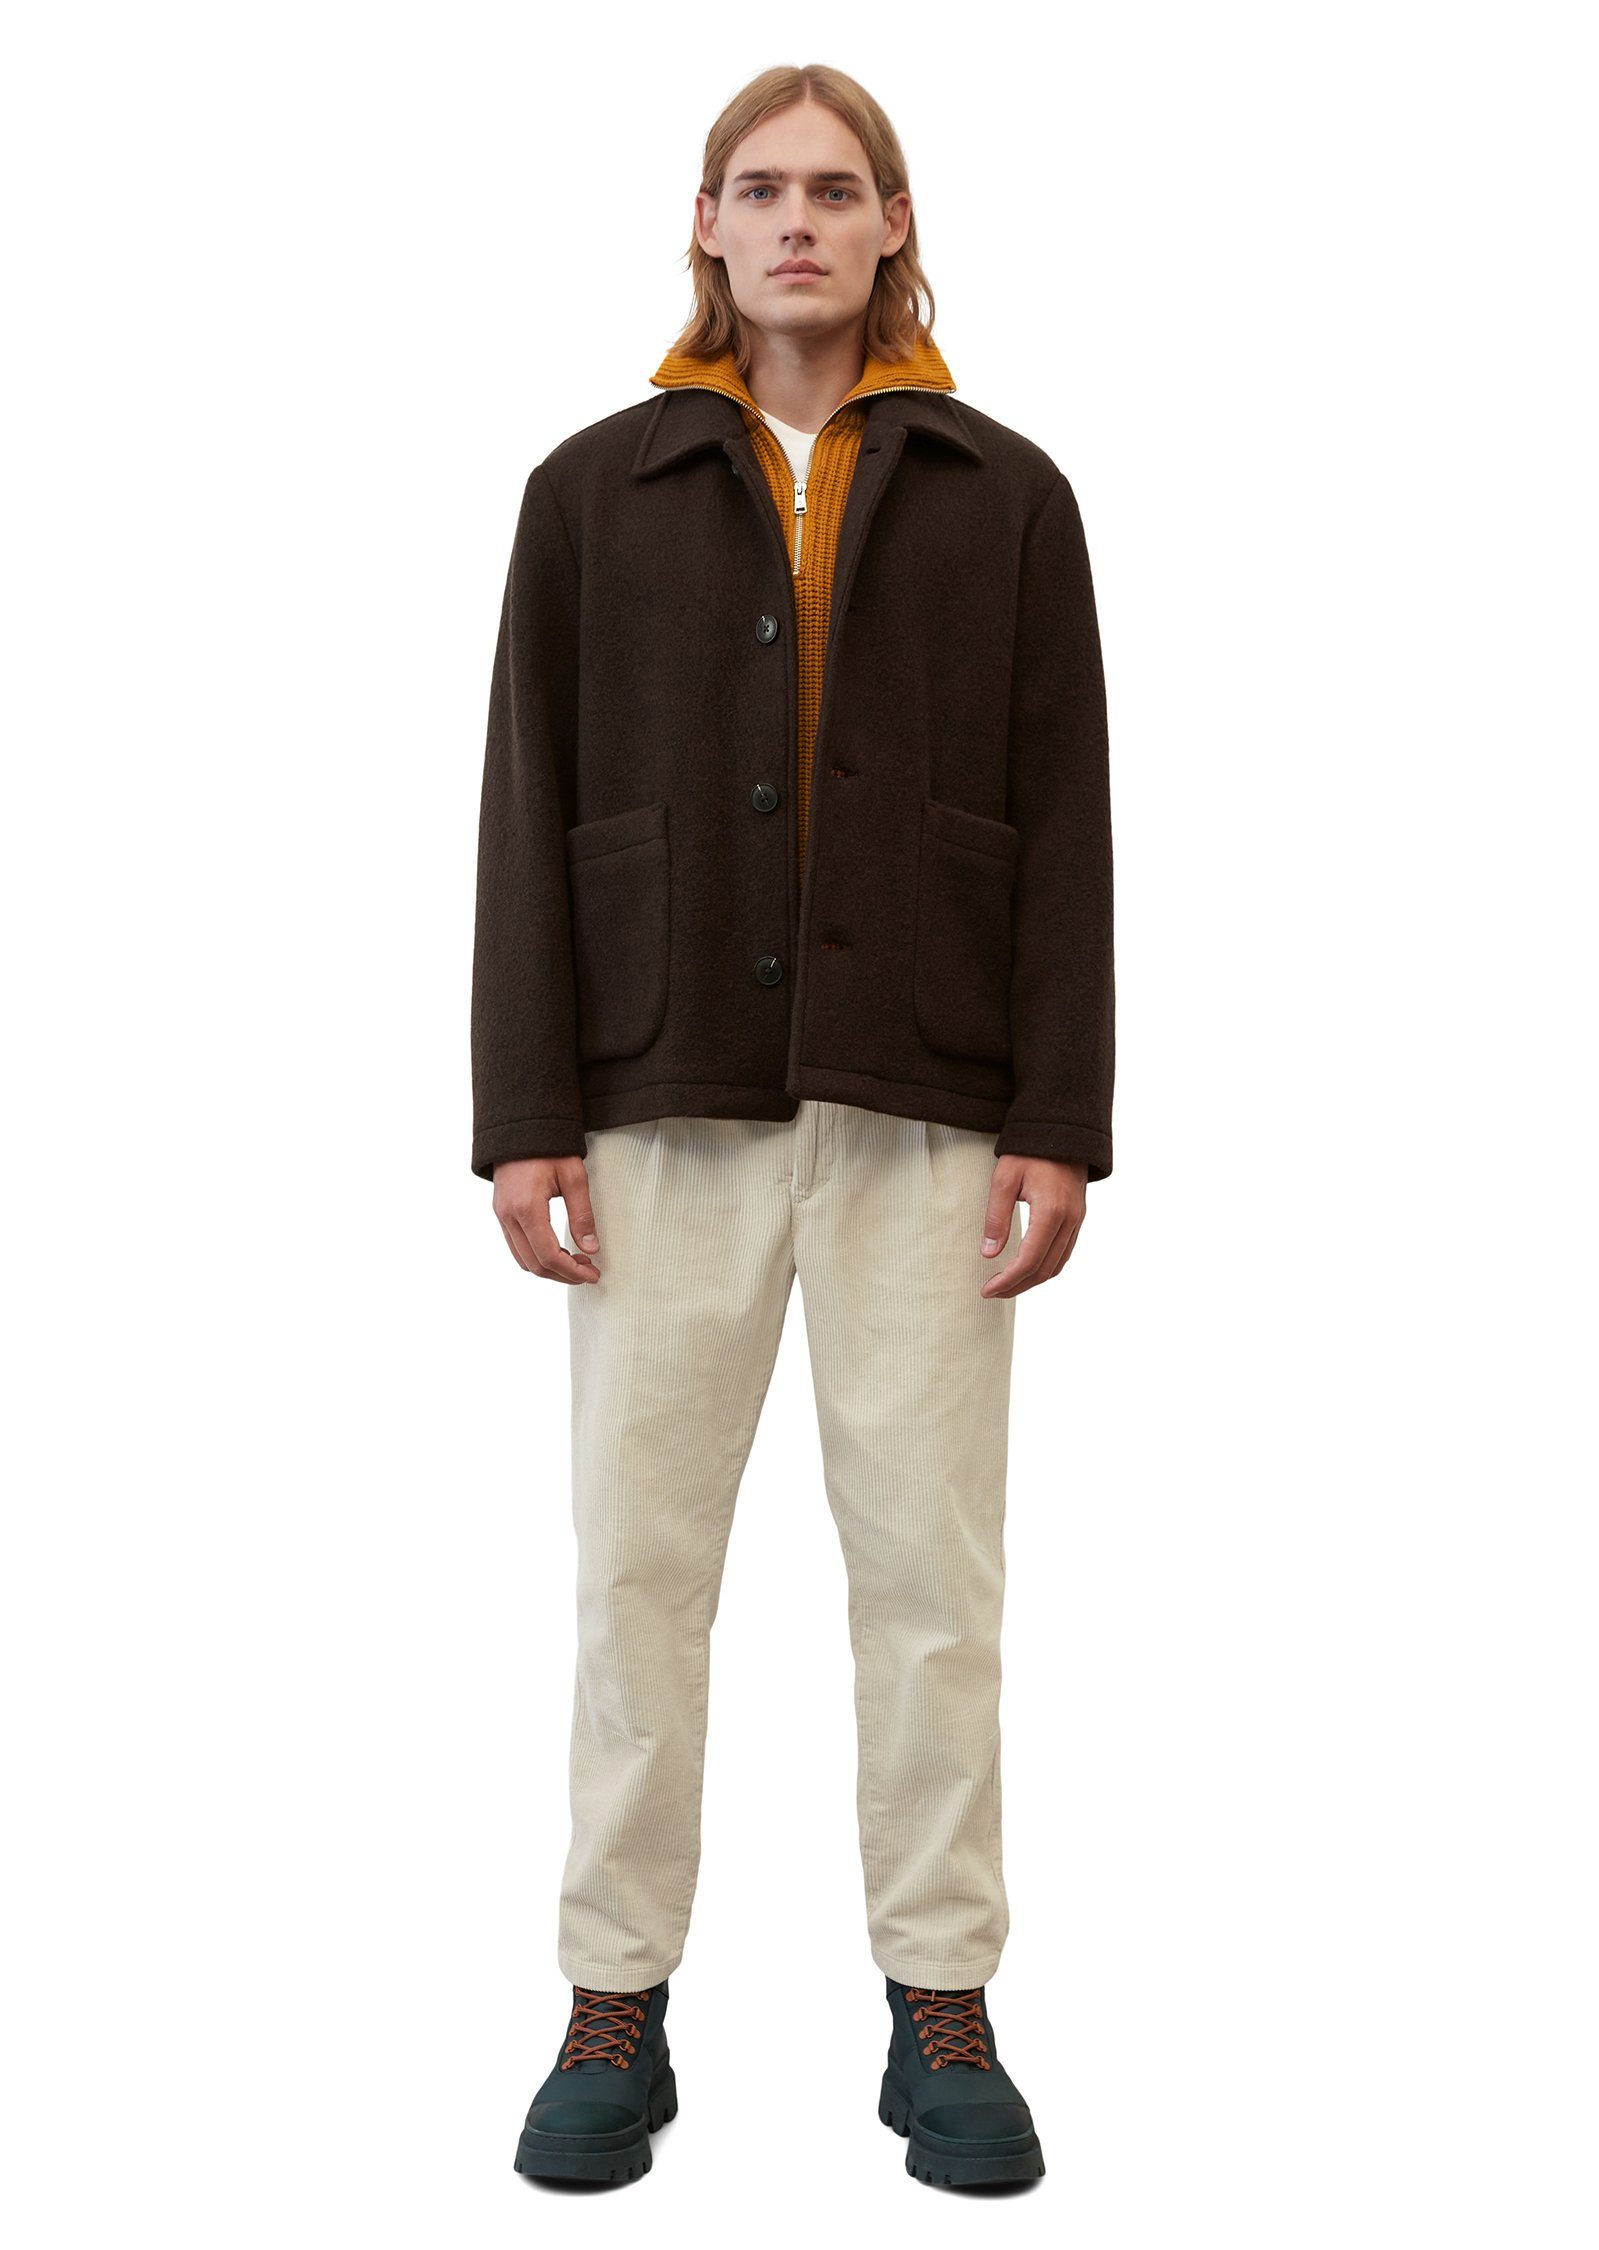 - Outdoorjacke Europe MANTECO® in O'Polo braun Marc aus MWOOL®by Made